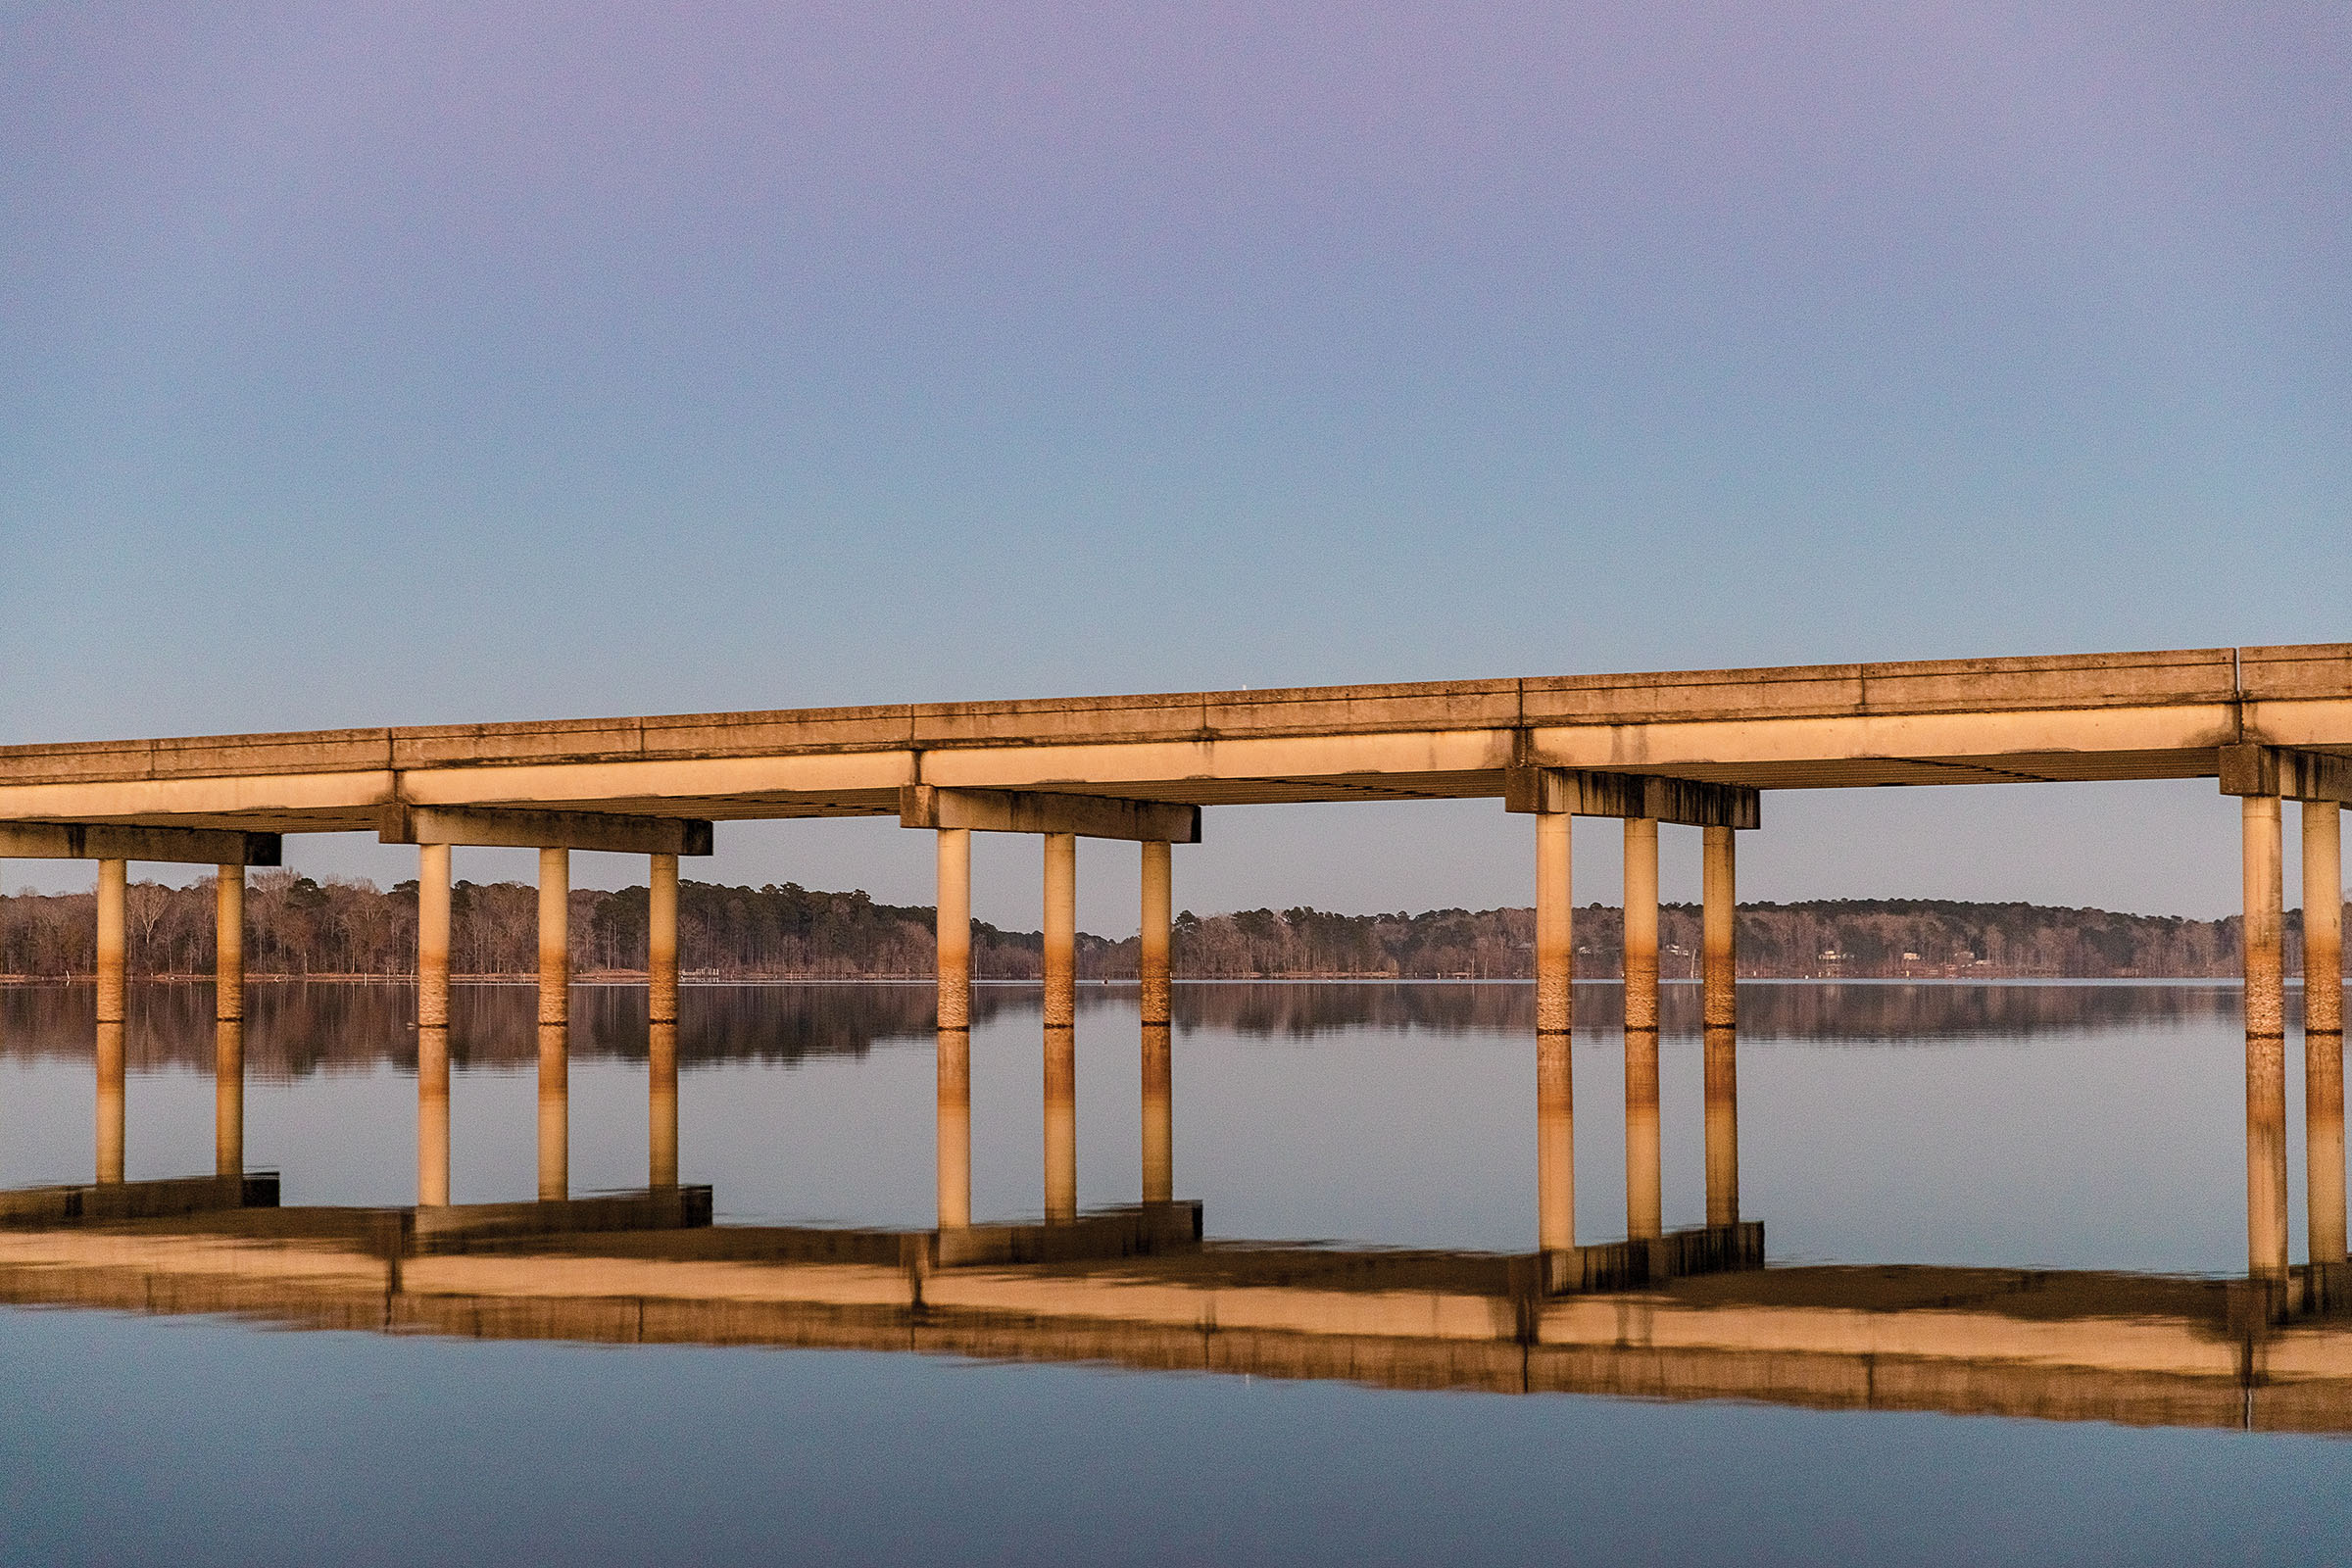 A concrete bridge spanning a perfectly flat body of  waternear low hills